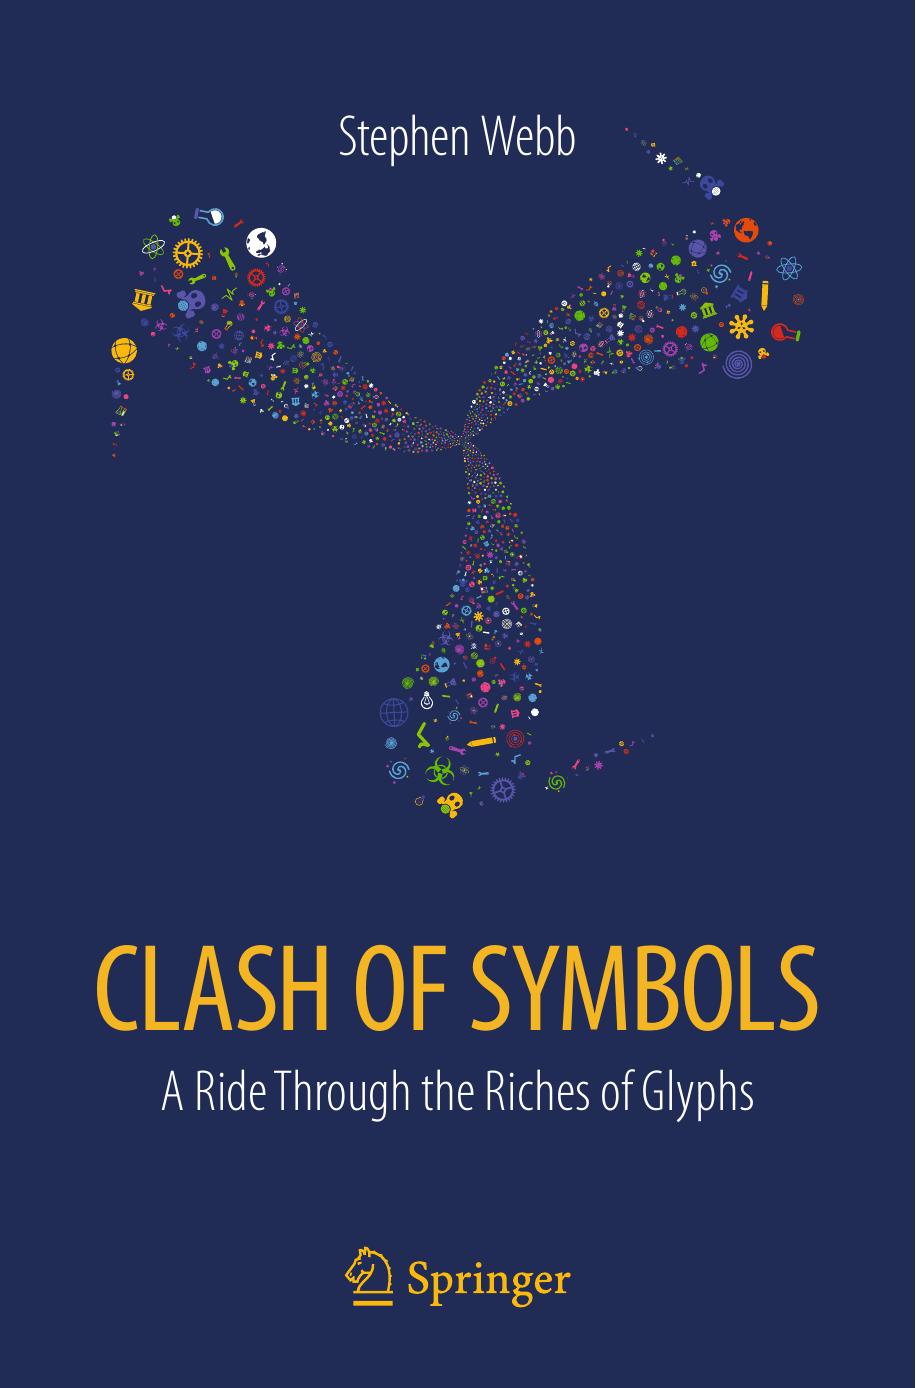 Clash of Symbols: A Ride Through the Riches of Glyphs